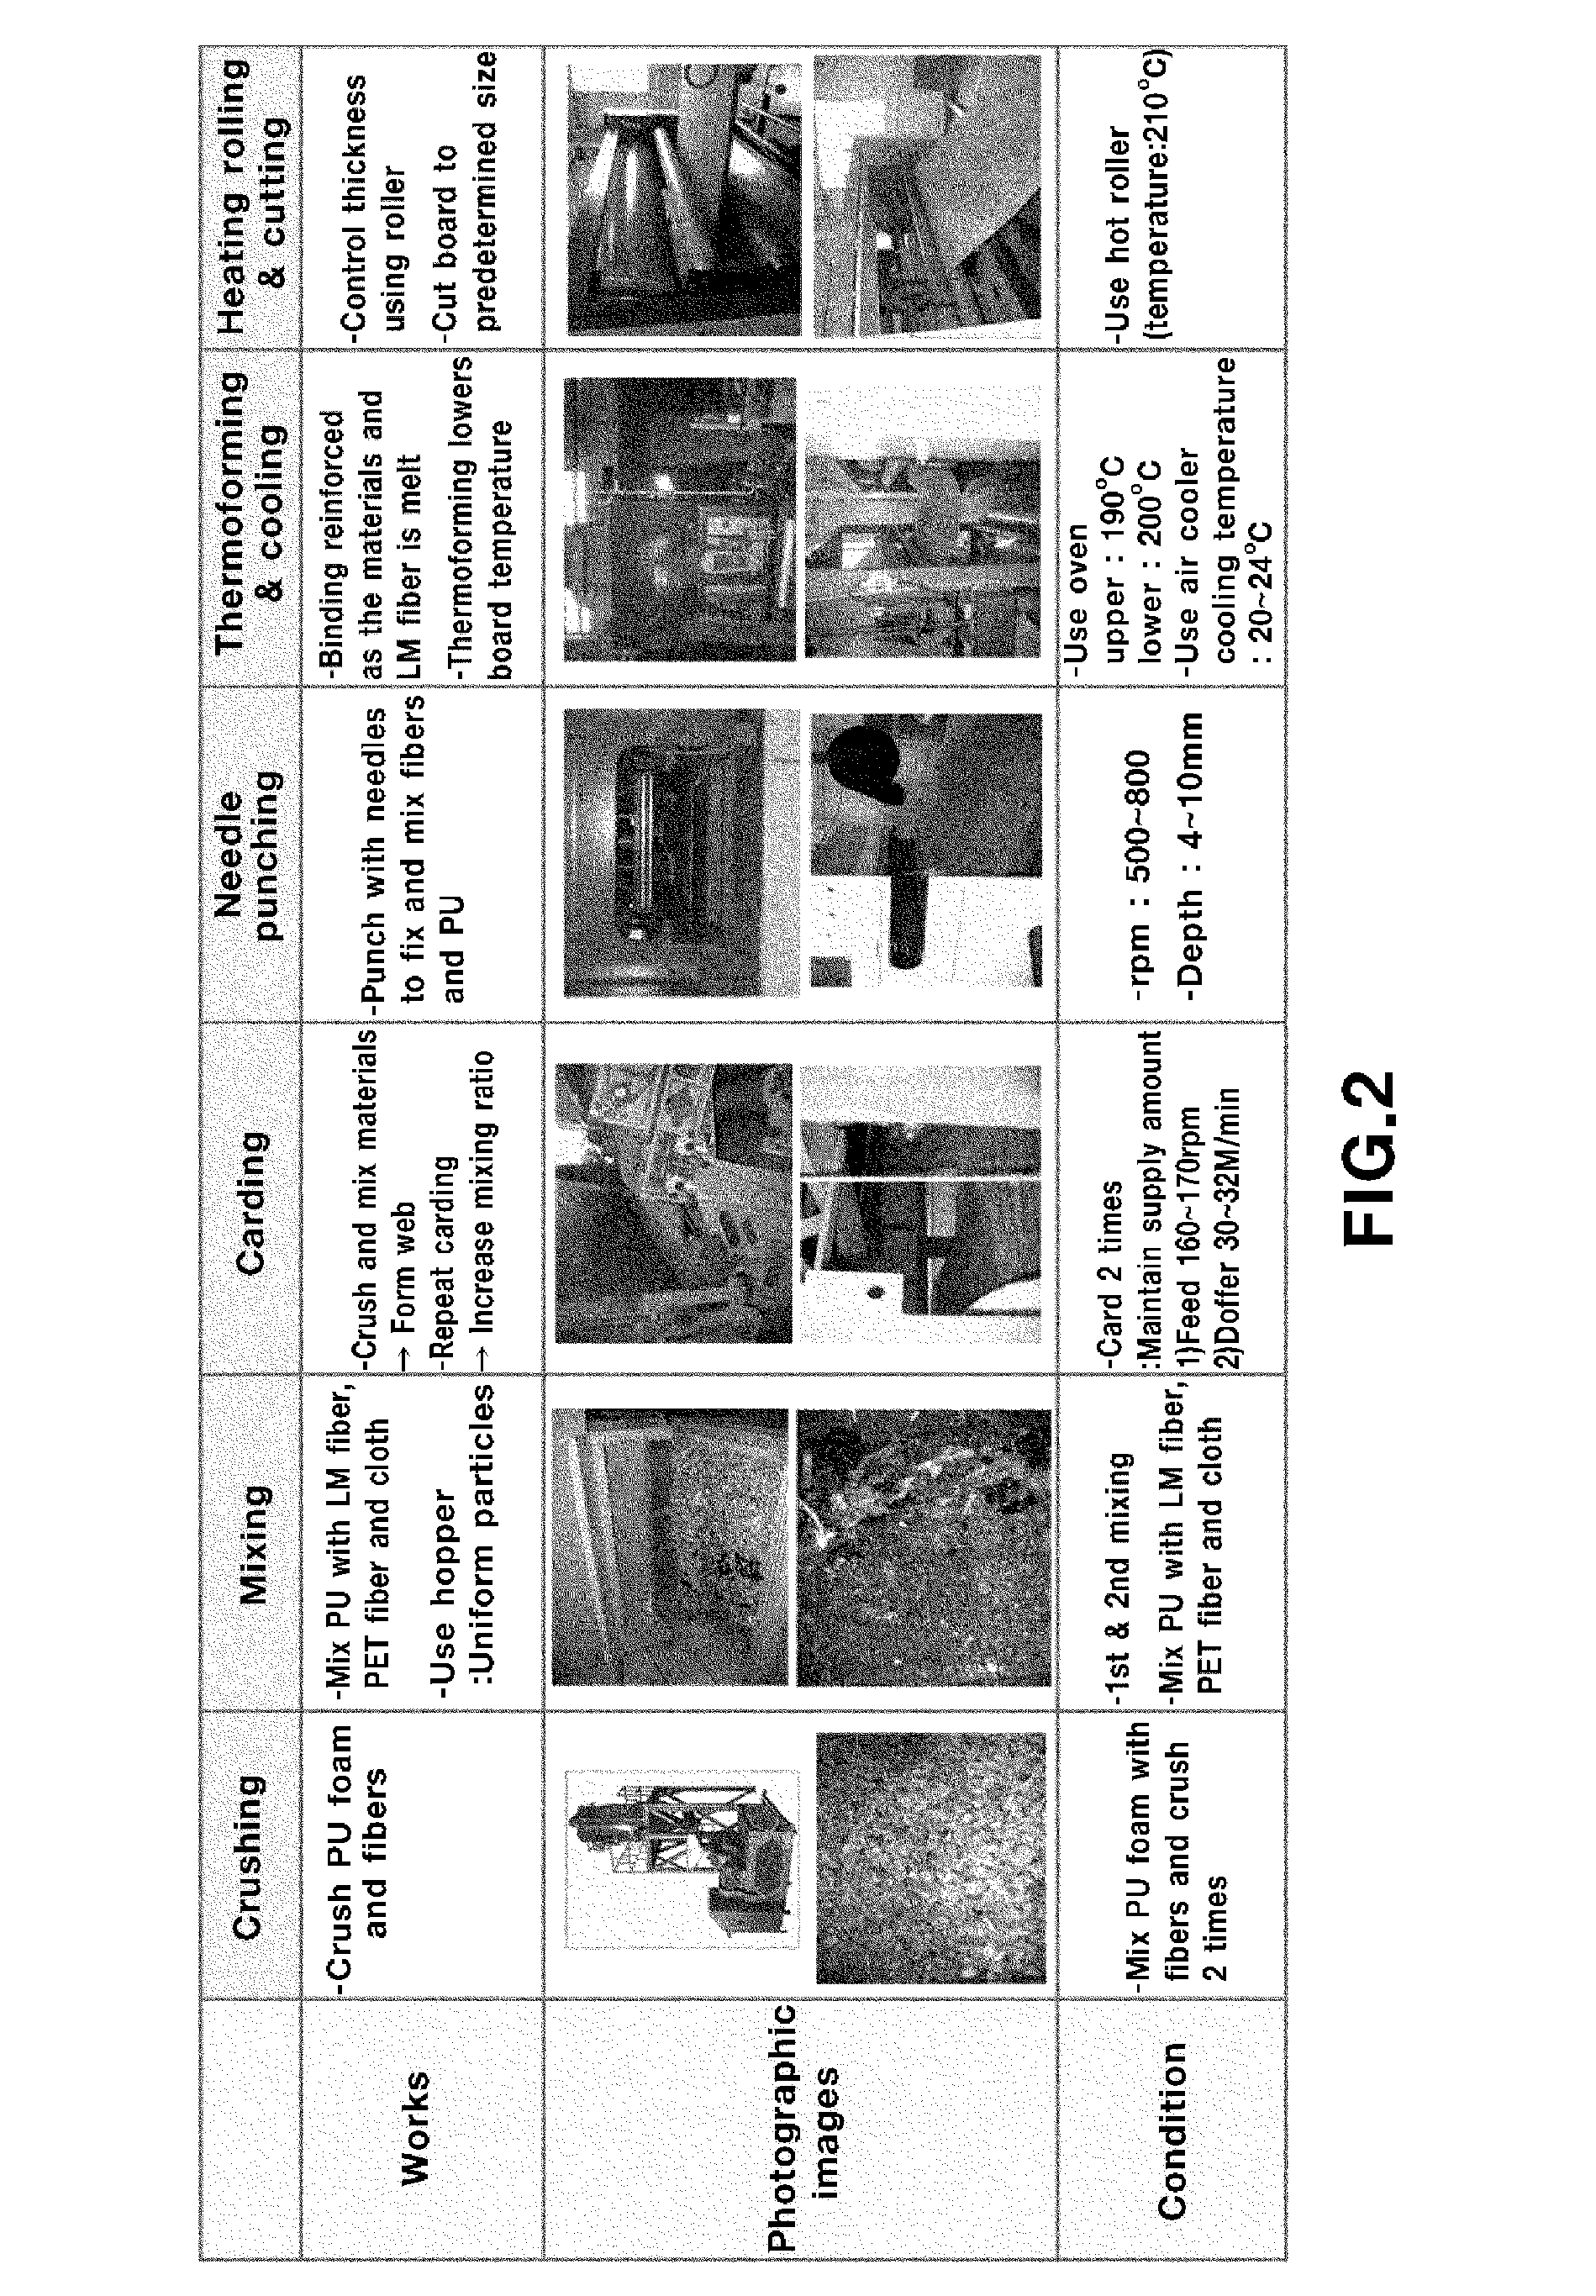 Method for manufacturing soundproofing material using polyurethane foam from car seat foam and composition thereof prepared thereby